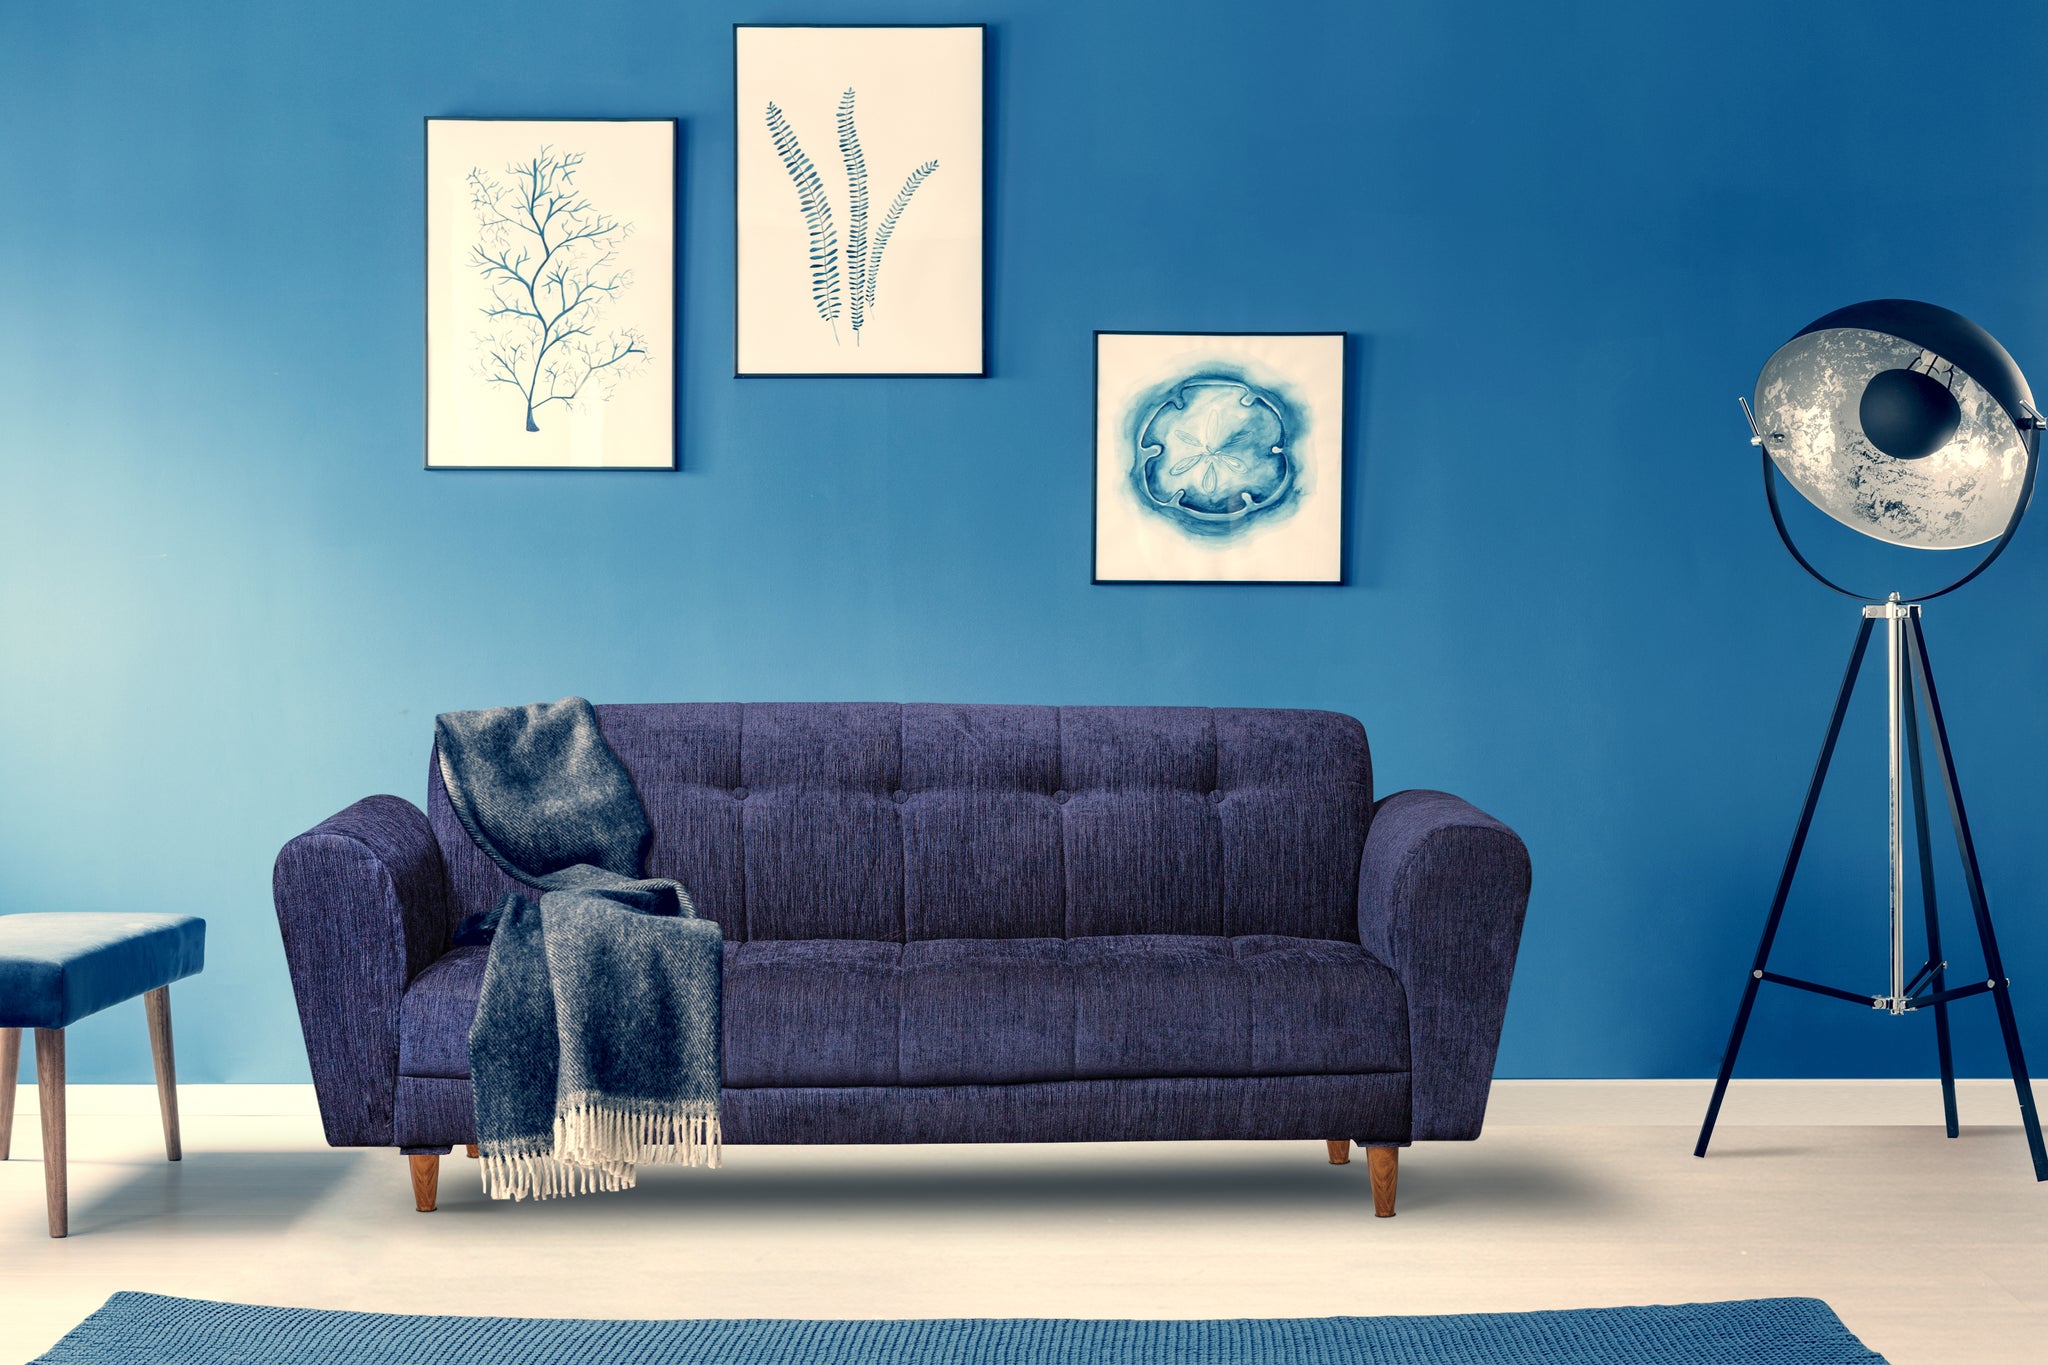 Seventh Heaven Milan 3 Seater Wooden Sofa Set Modern & Elegant Smart Furniture Range for luxurious homes, living rooms and offices. Blue Colour Molphino fabric with sheesham polished wooden legs.